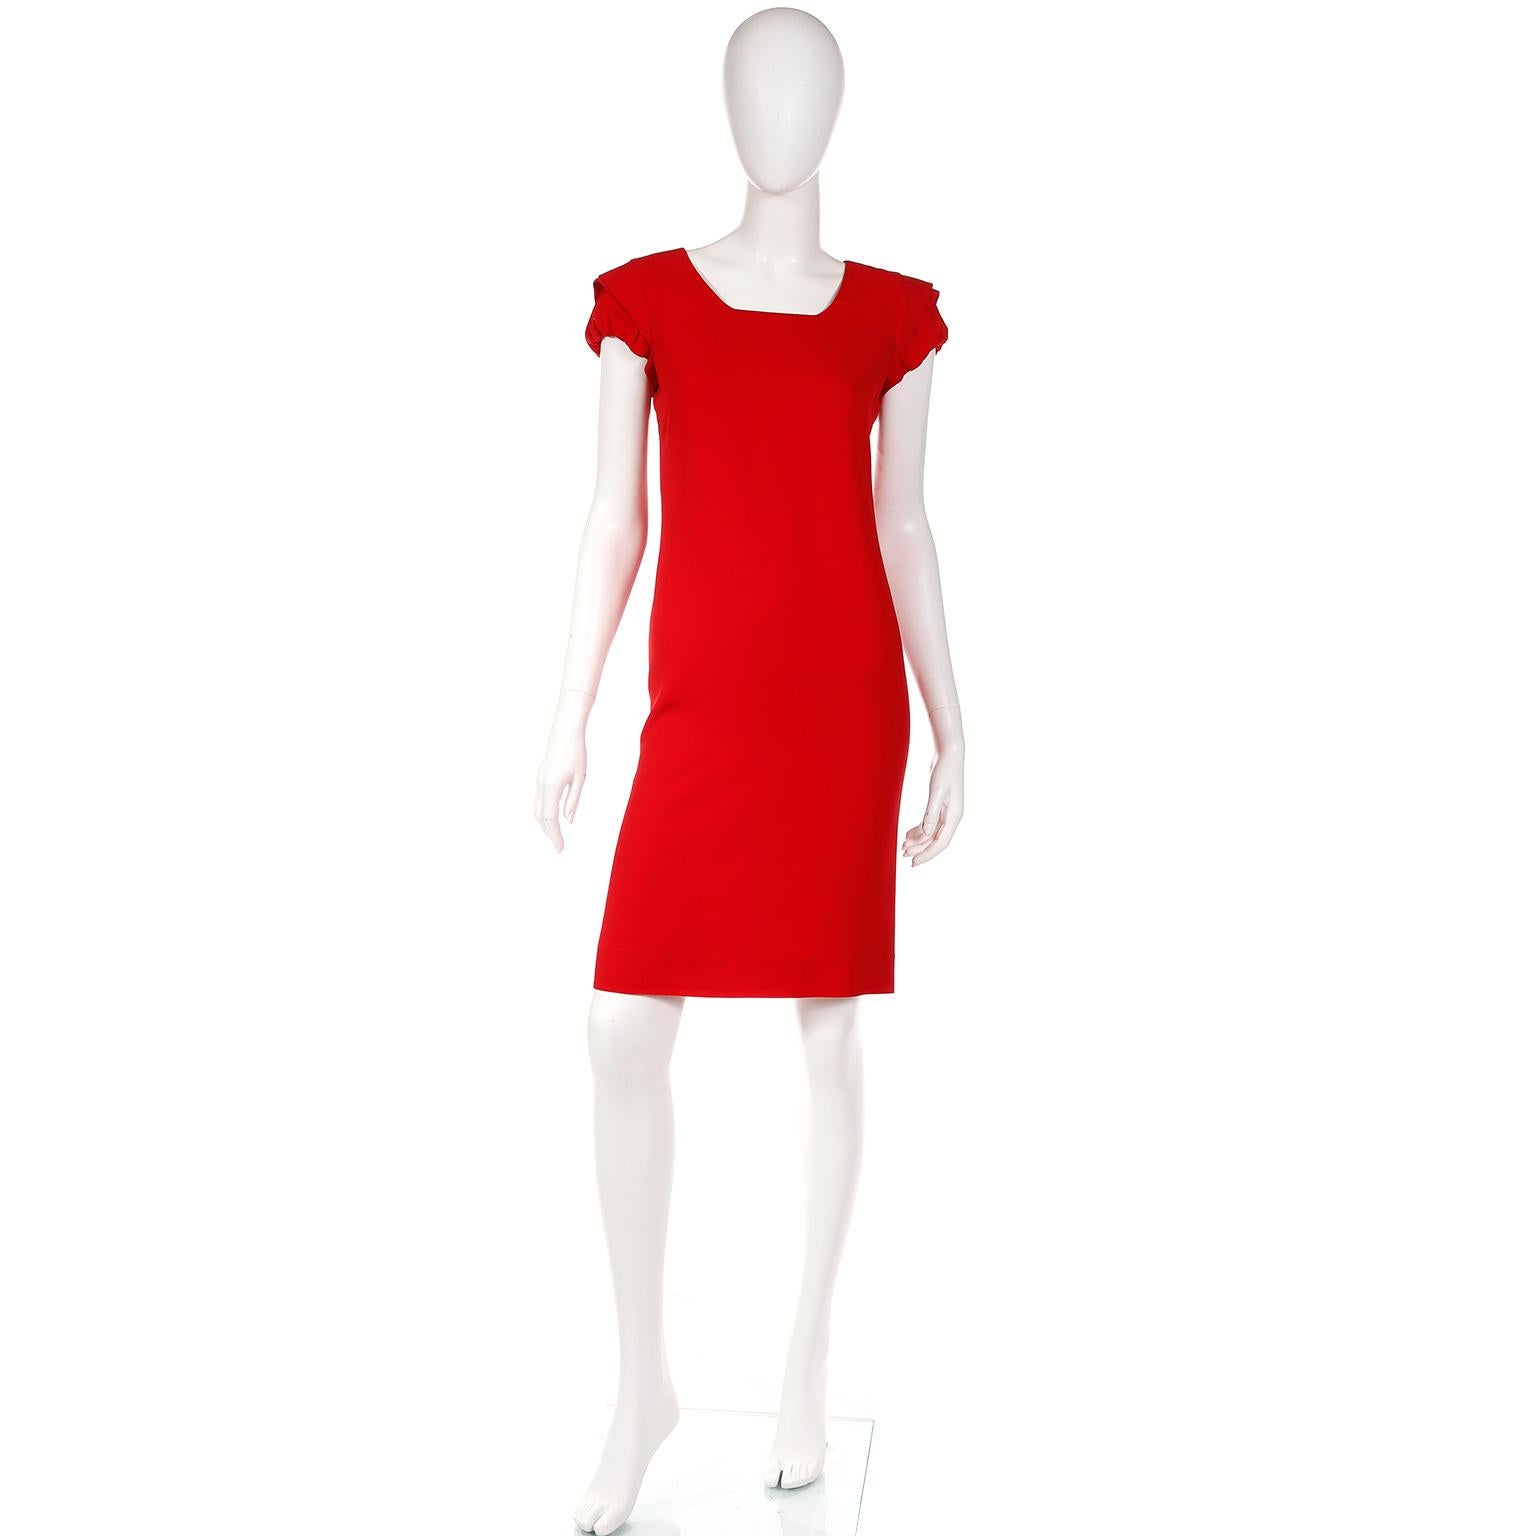 There is nothing like the perfect red!  The Valentino dress is in the classic 